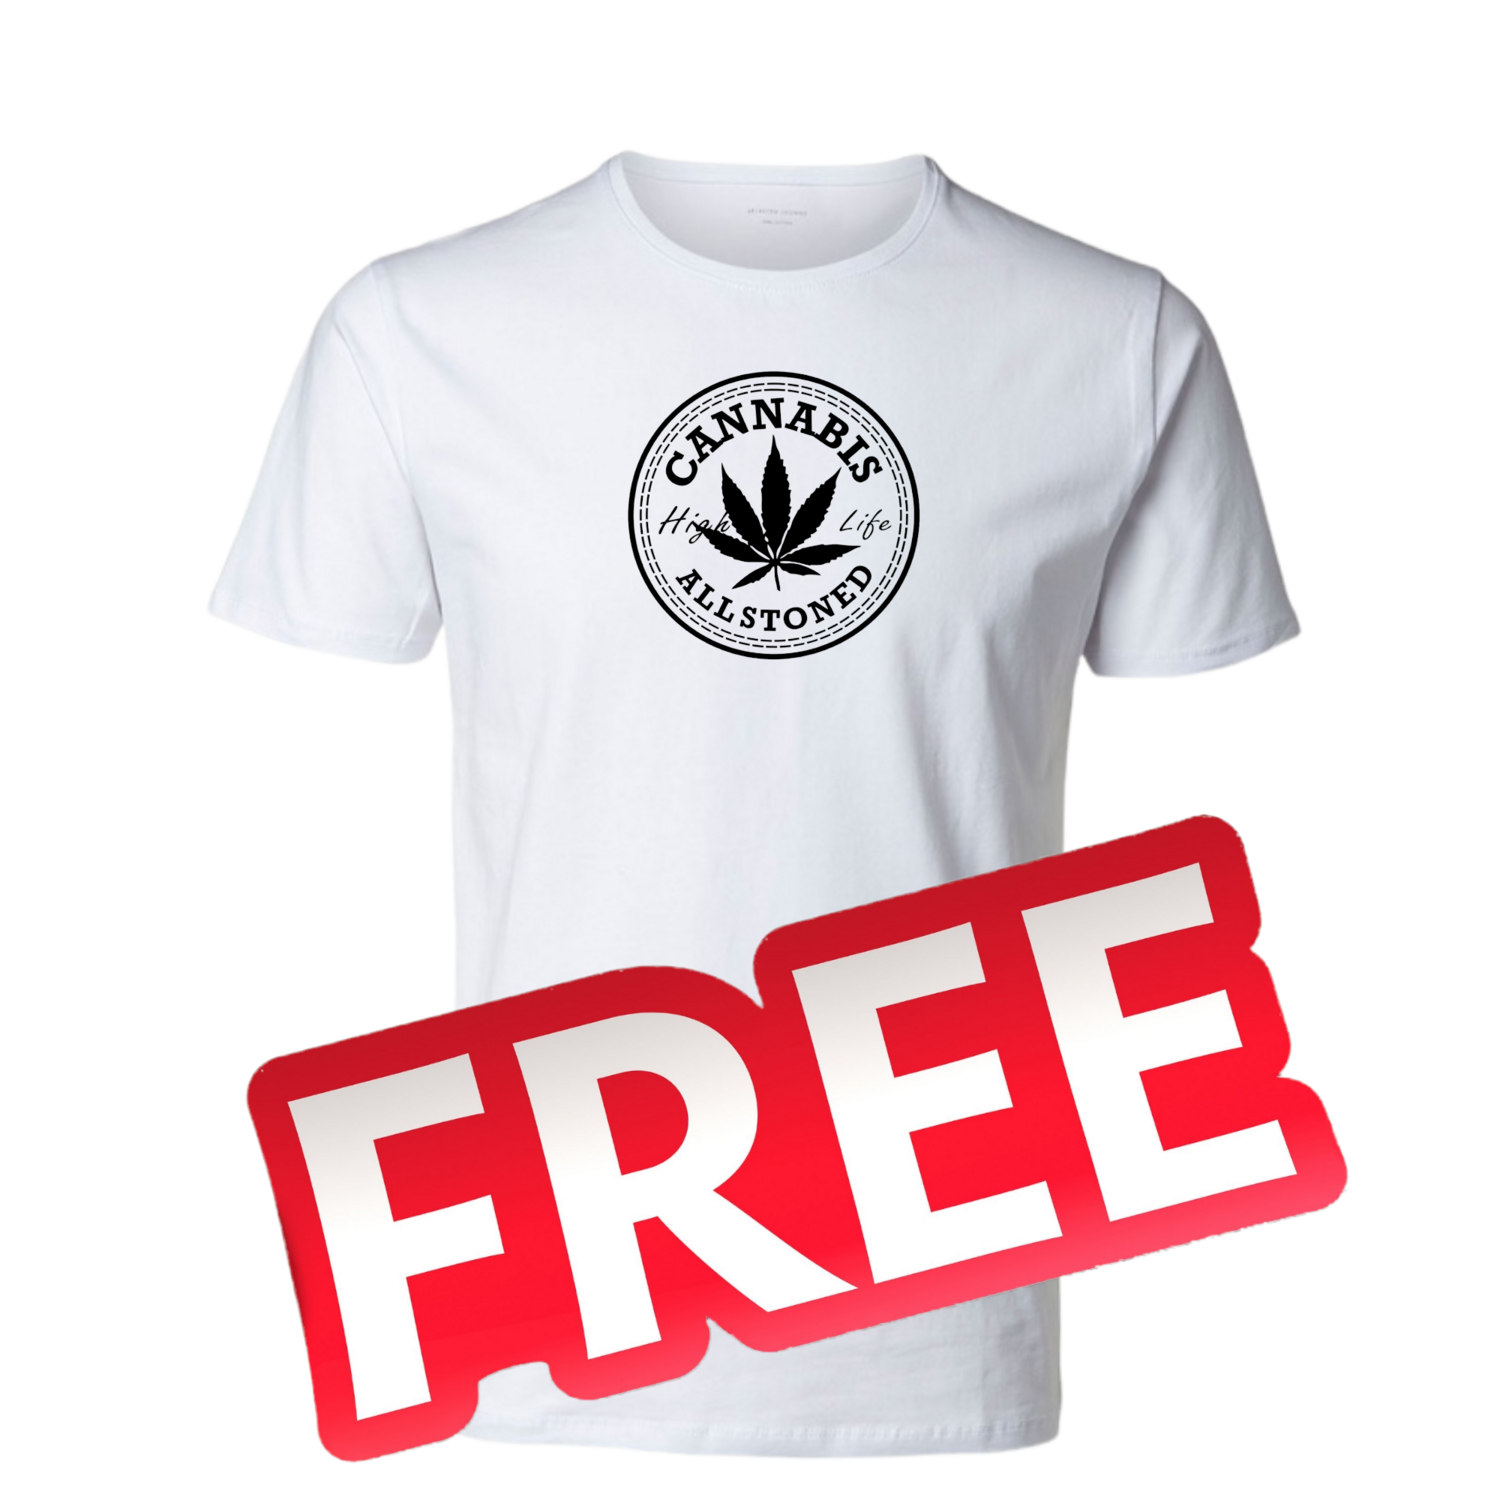 FREE T SHIRT of the week 420 edition chucks
Only small to xl is free anything bigger  is a lil extra